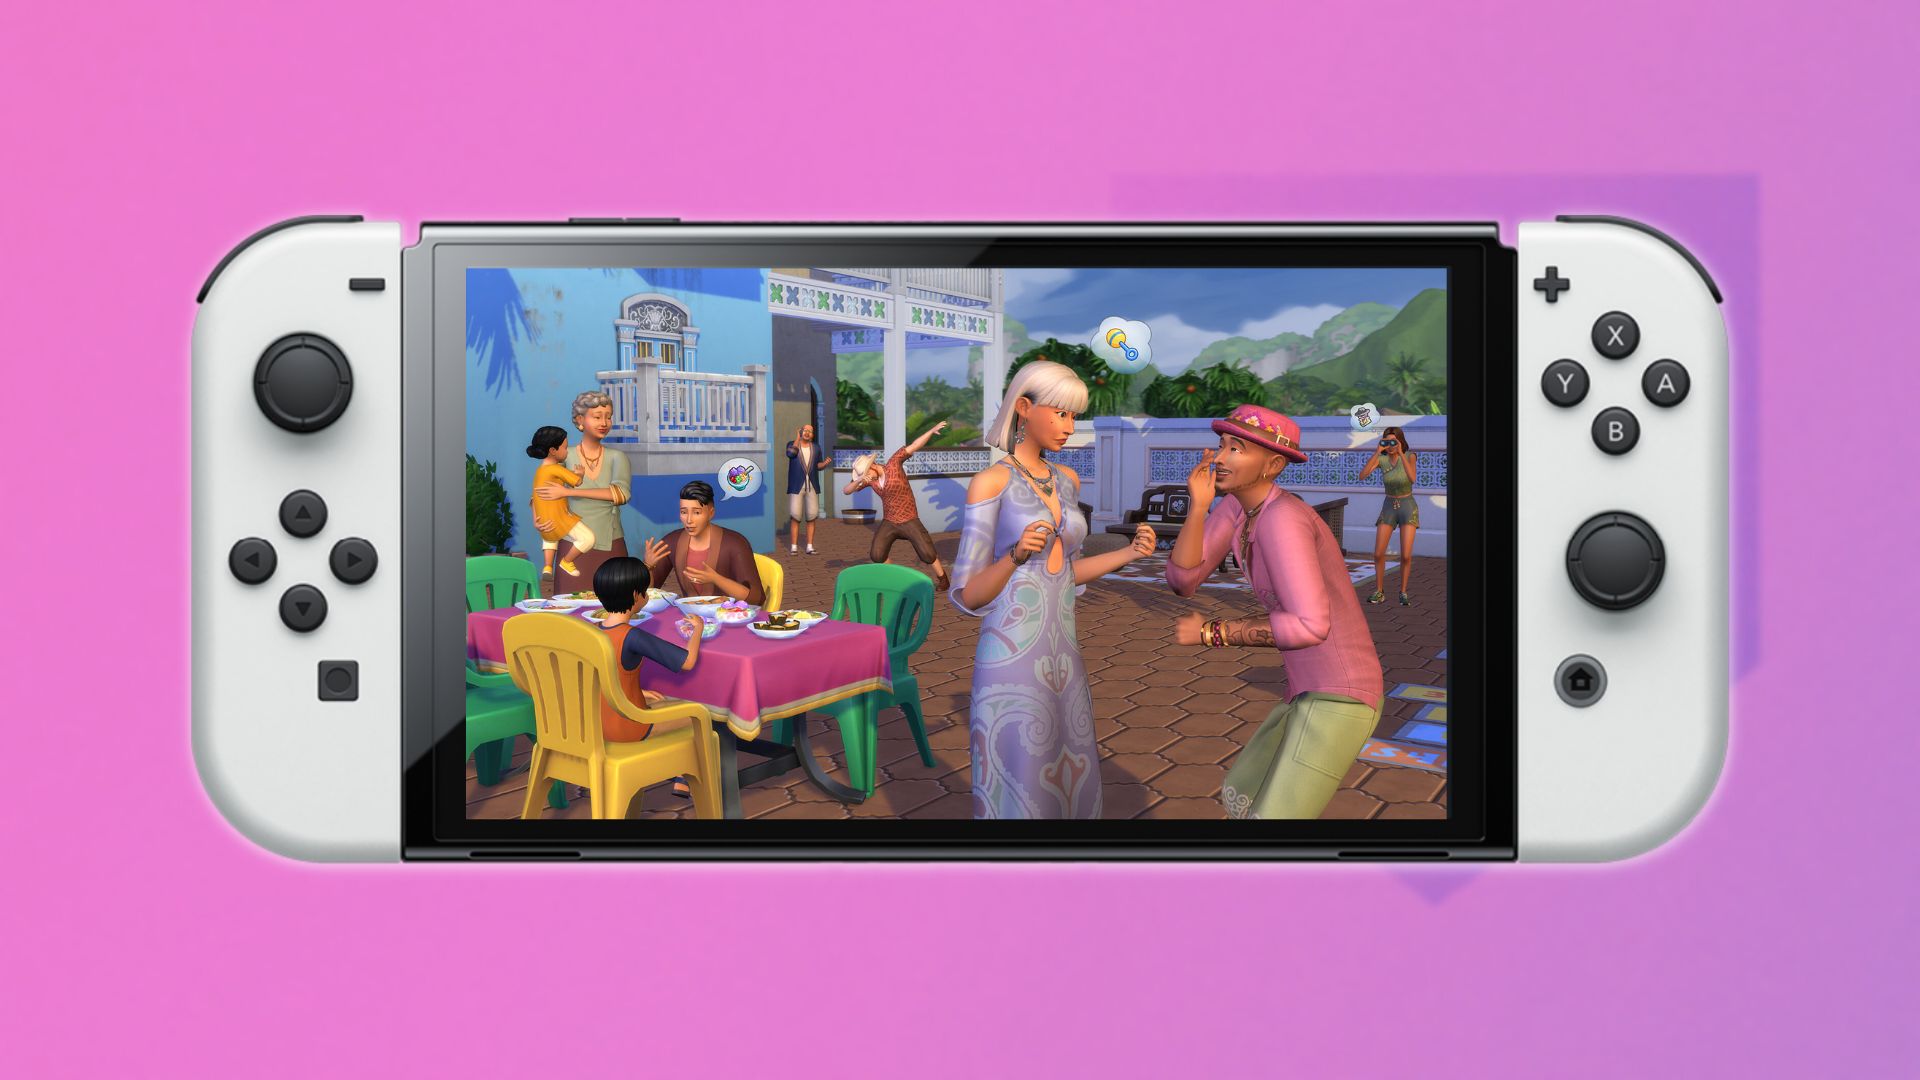 The Sims 4 will become free to download on PC/Mac/Consoles on Oct